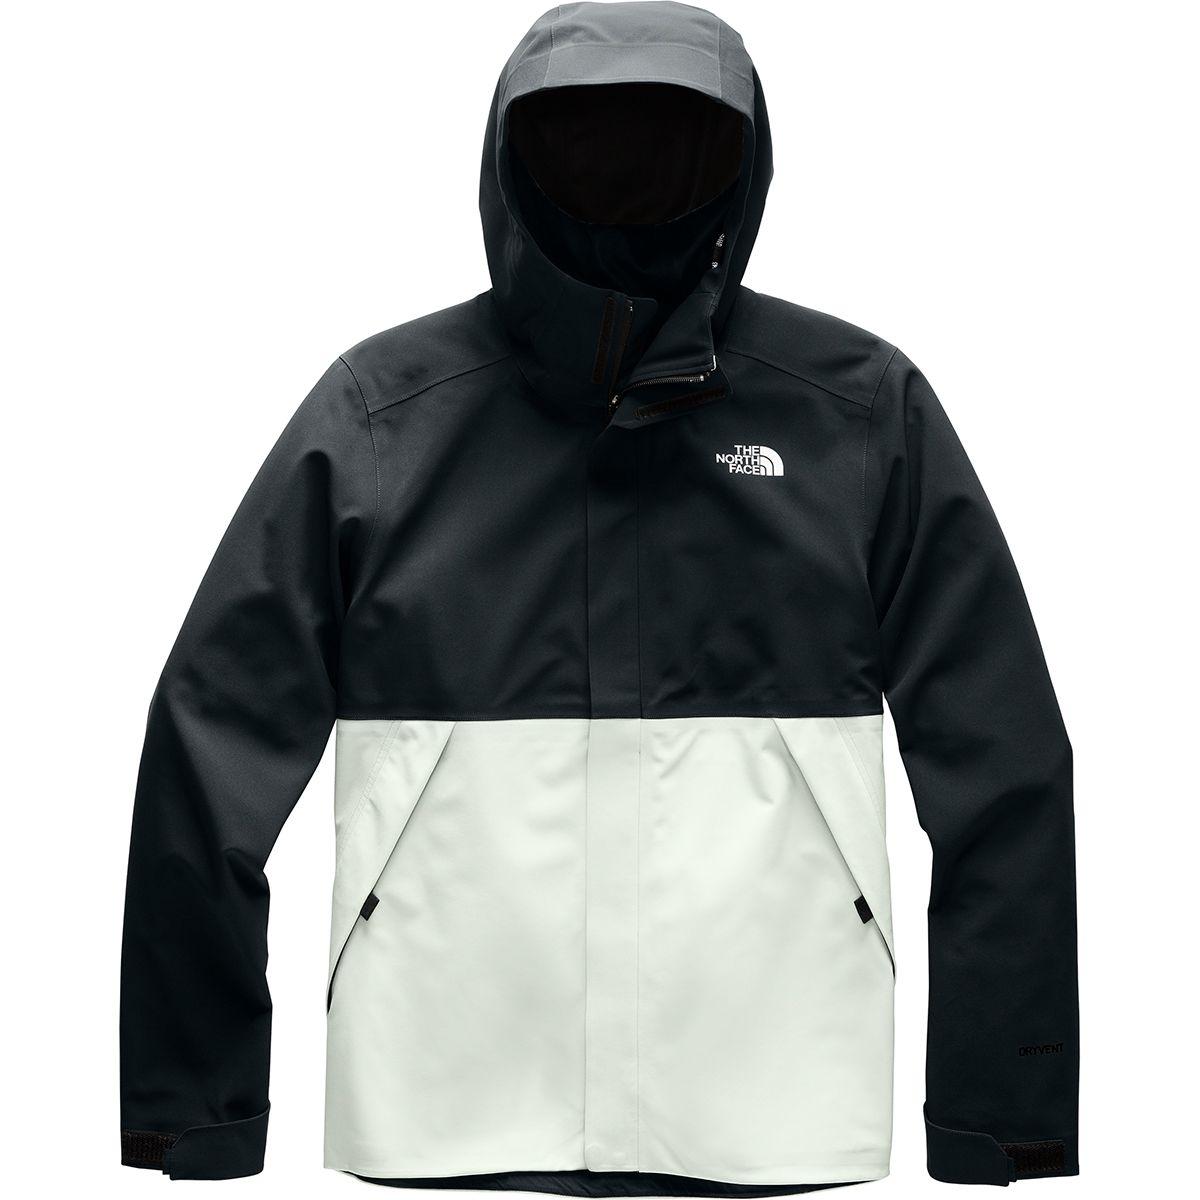 The North Face Synthetic Apex Flex Dryvent Jacket in Black for Men - Lyst